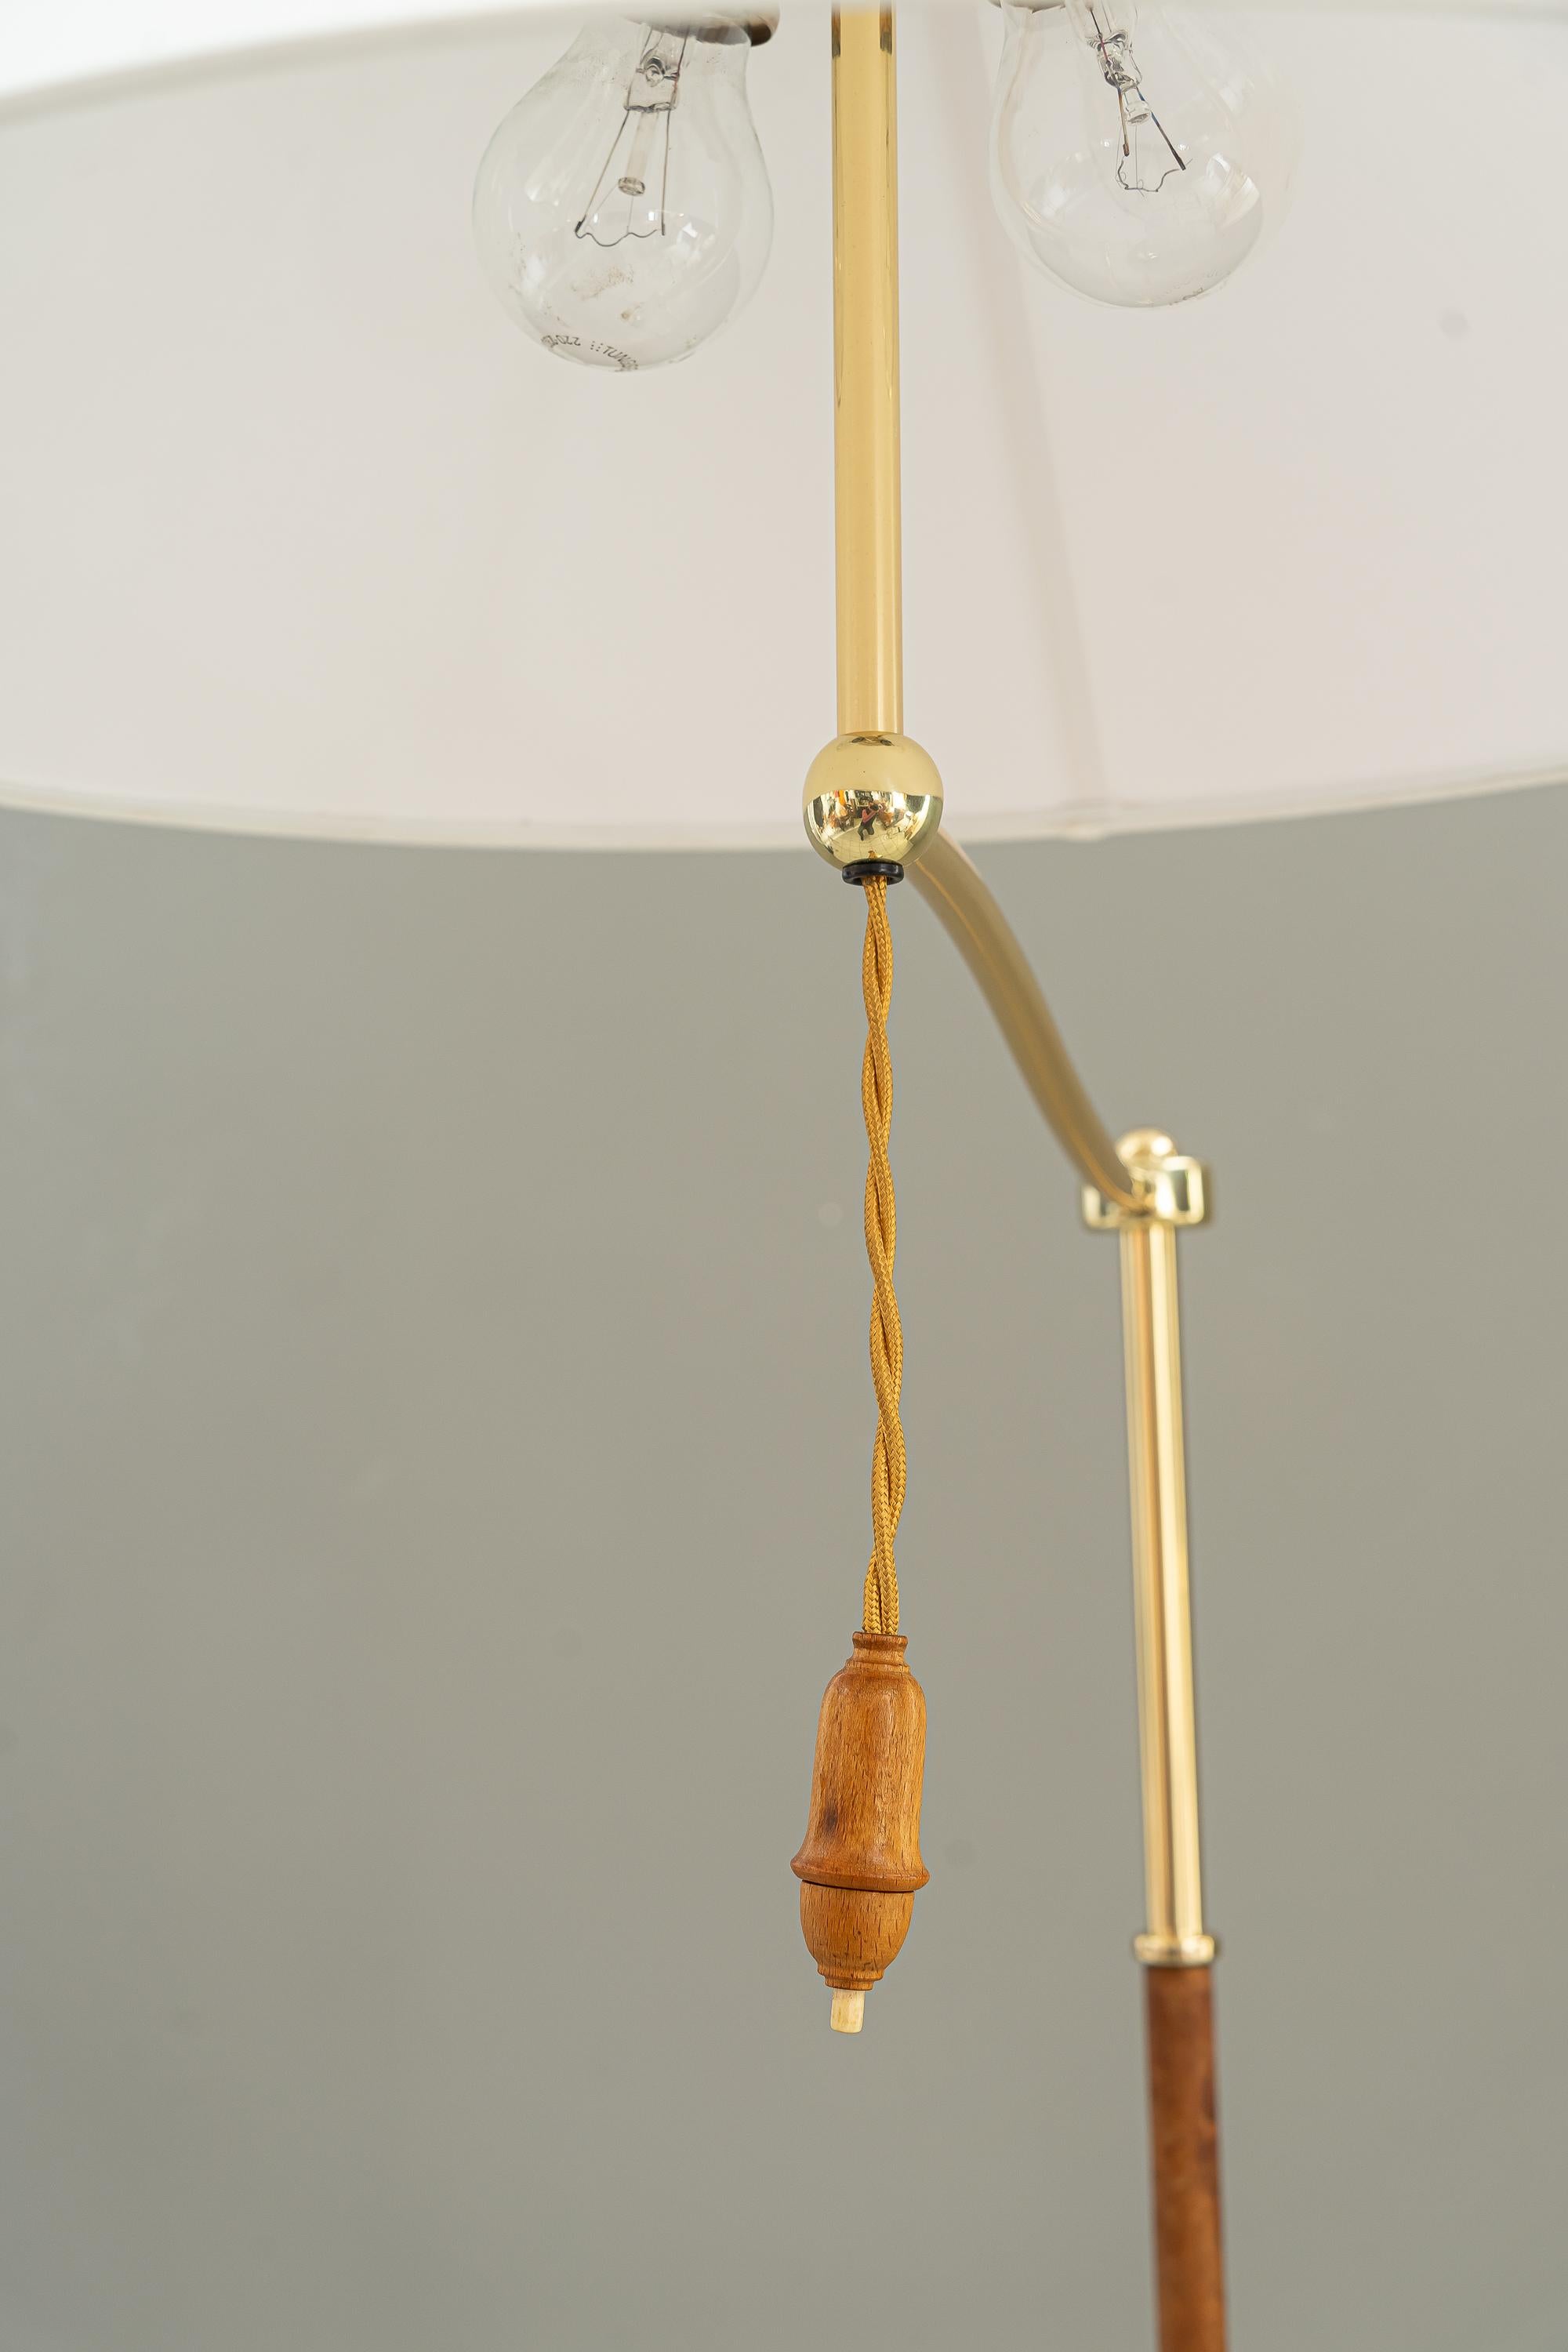 Mid-20th Century Rare Floor Lamp by Josef Frank for J.T.Kalmar Around 1950s For Sale